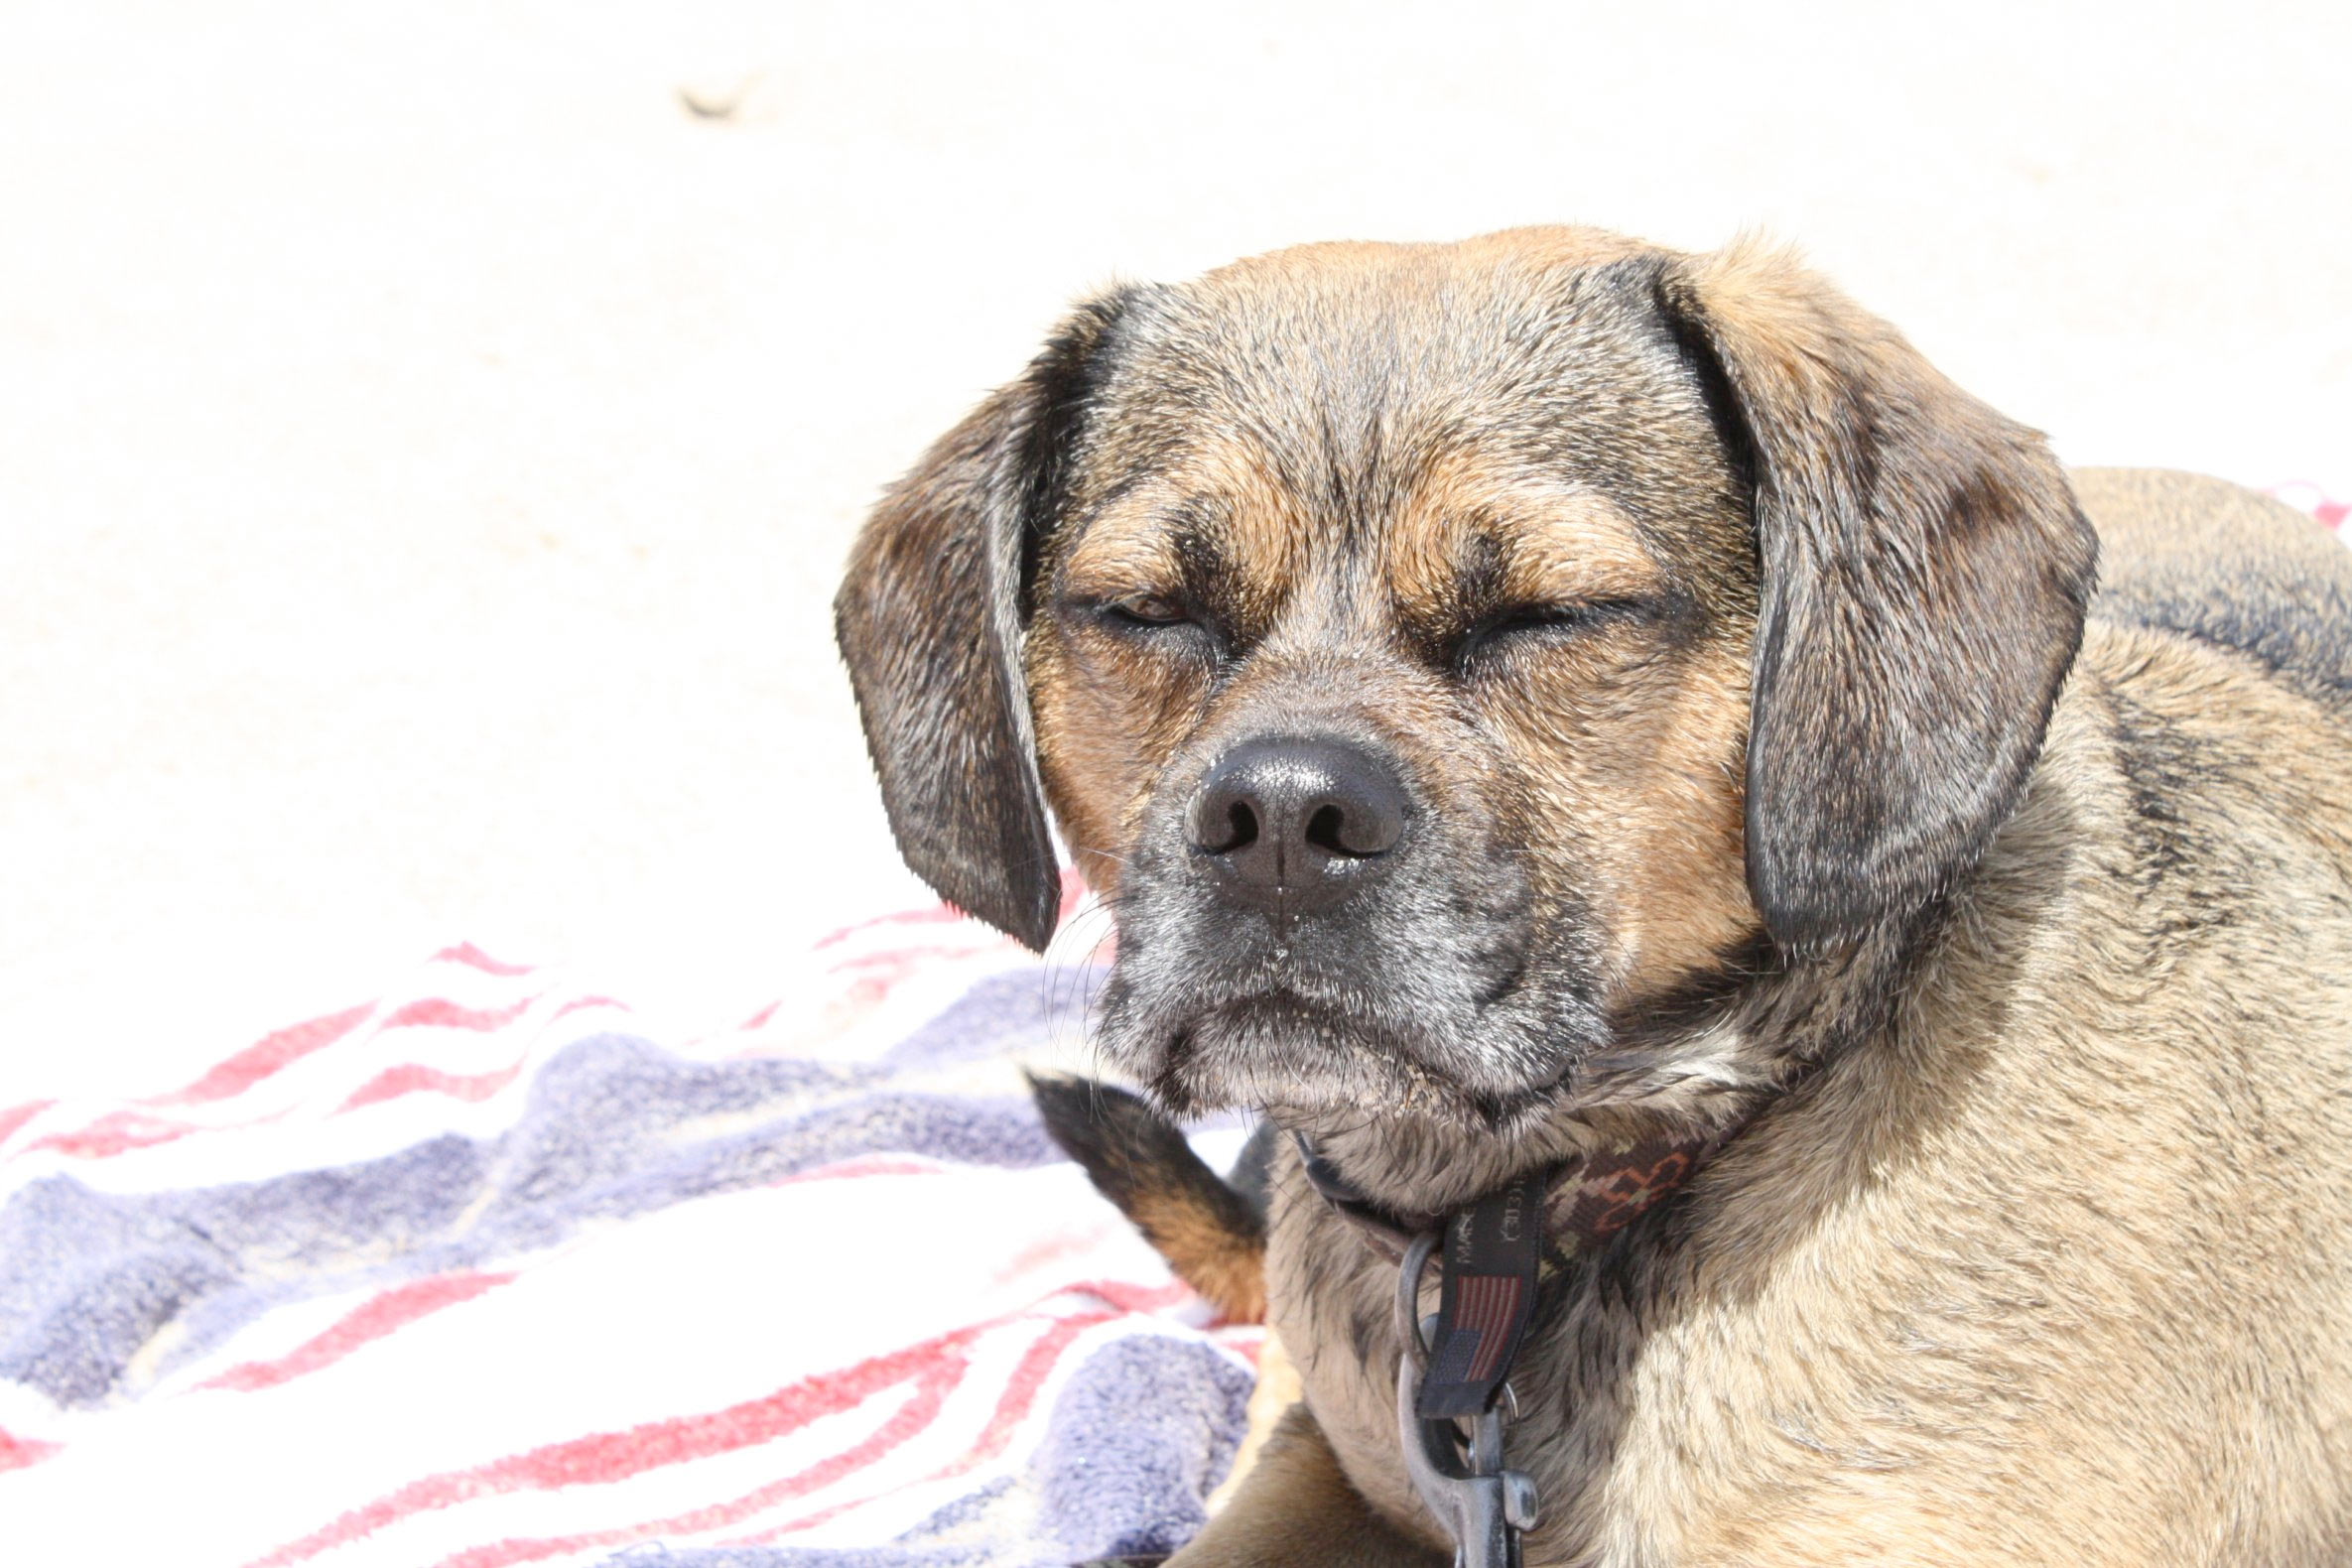 Dog-friendly cape cod campgrounds: a list of campgrounds that allow dogs on cape cod.